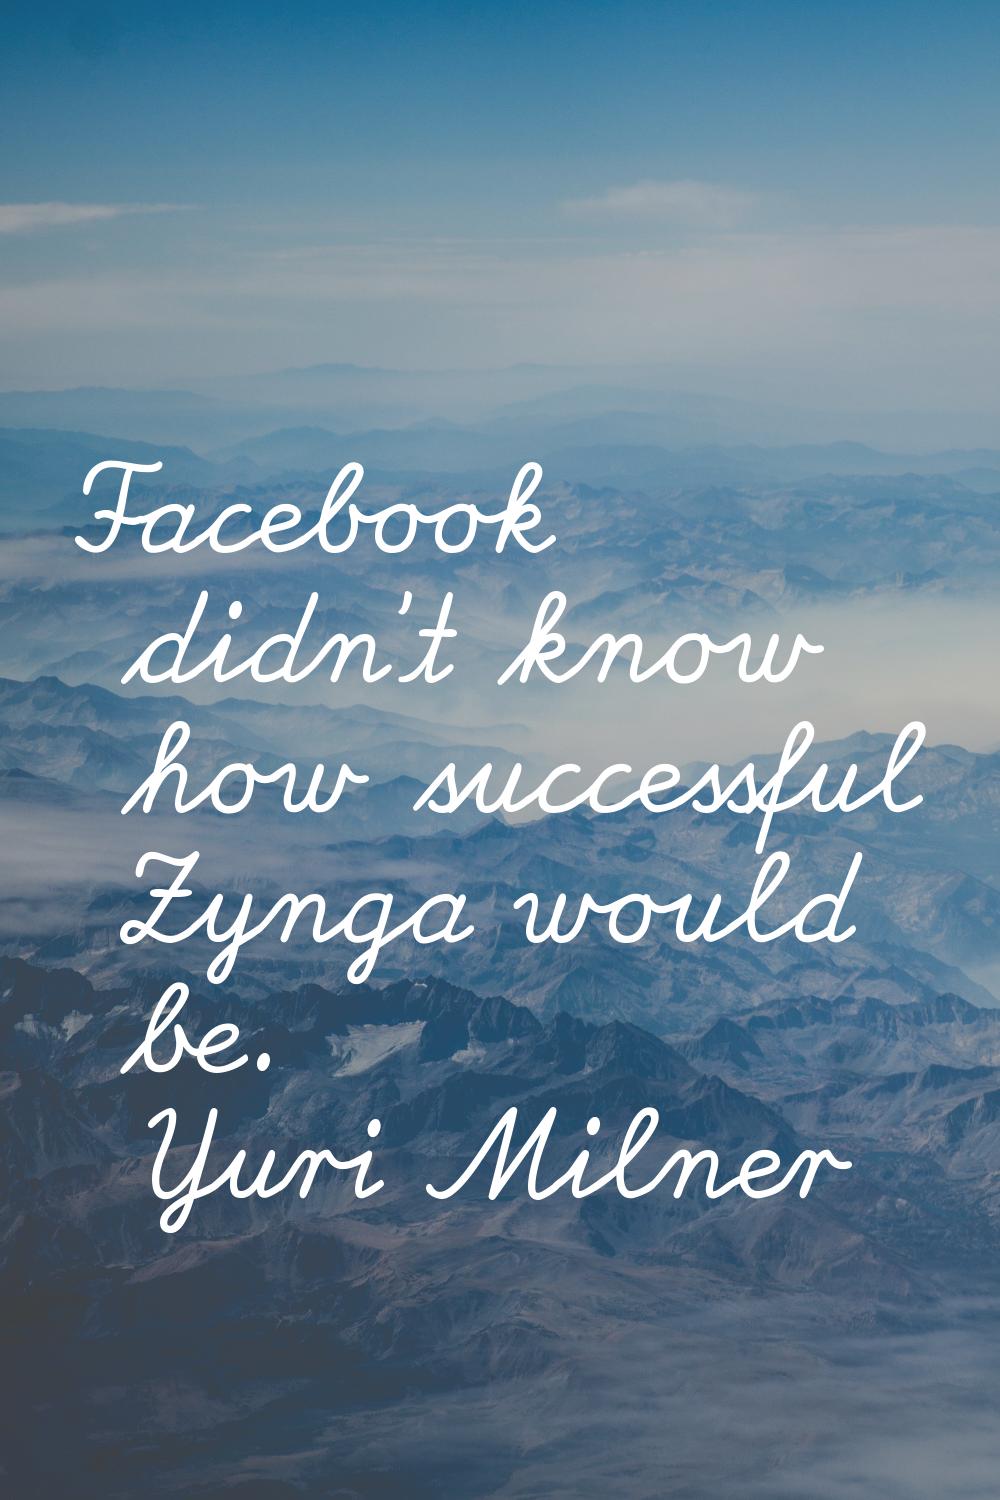 Facebook didn't know how successful Zynga would be.